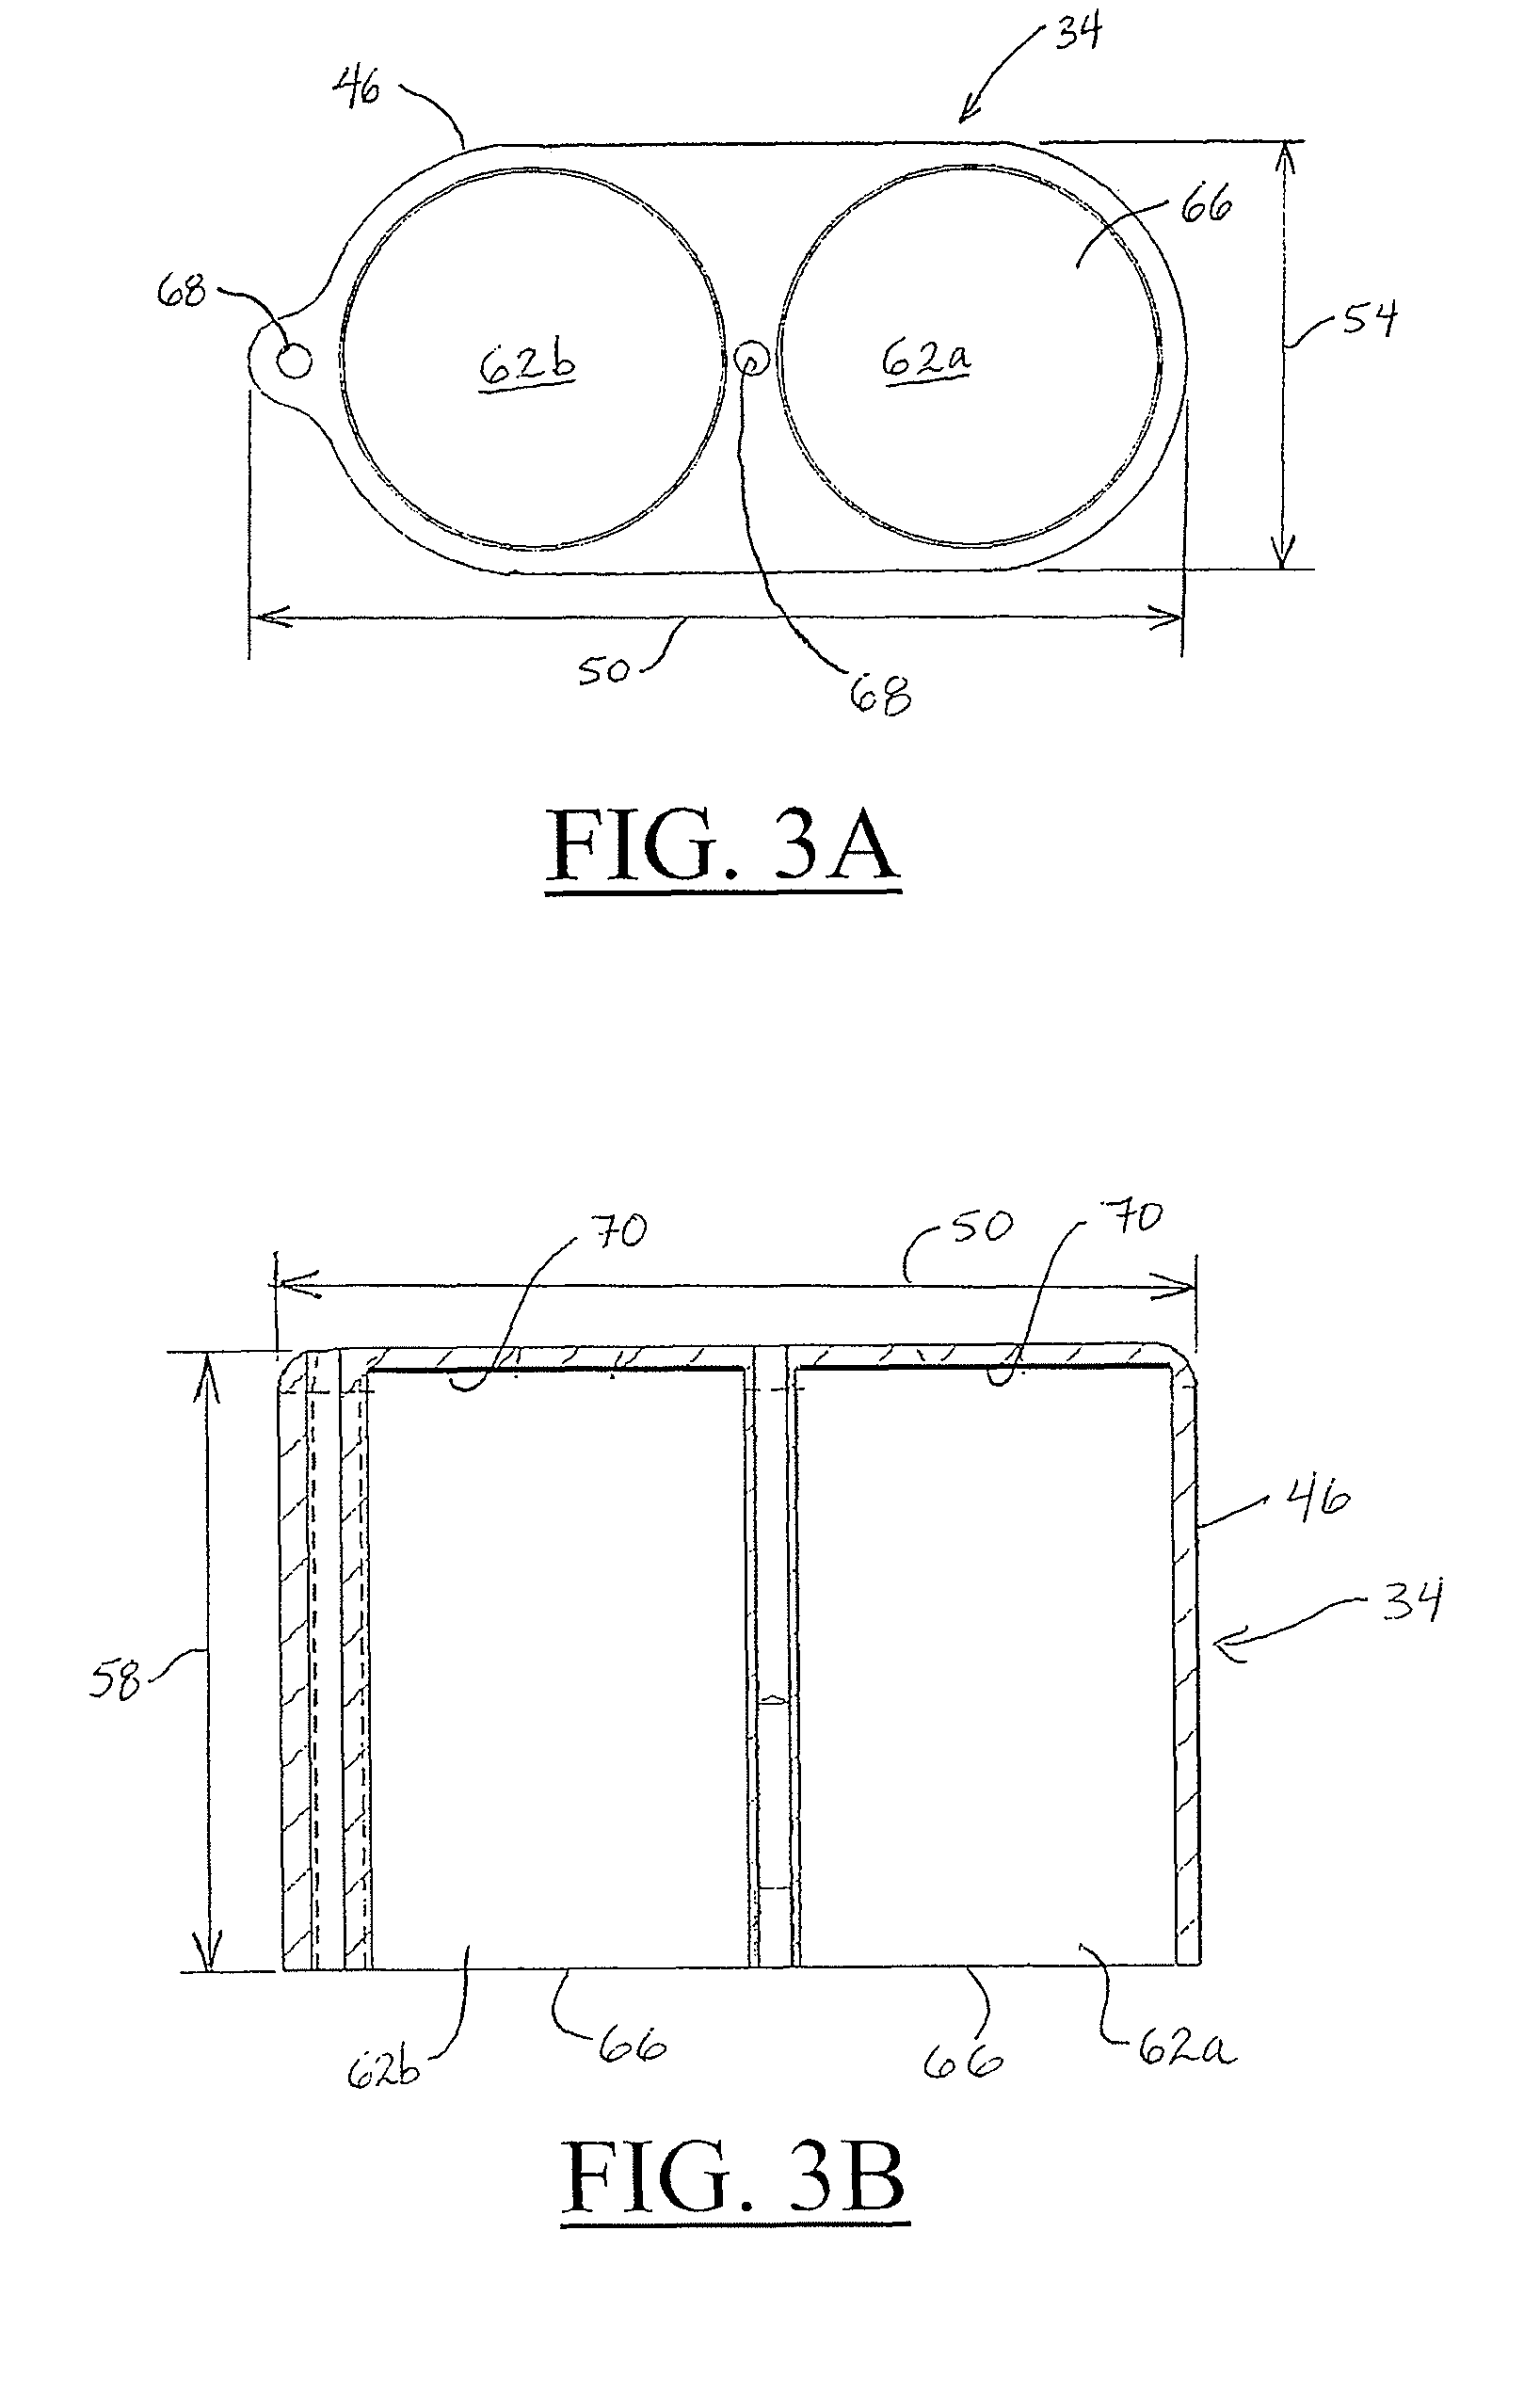 Medical devices, apparatuses, systems, and methods